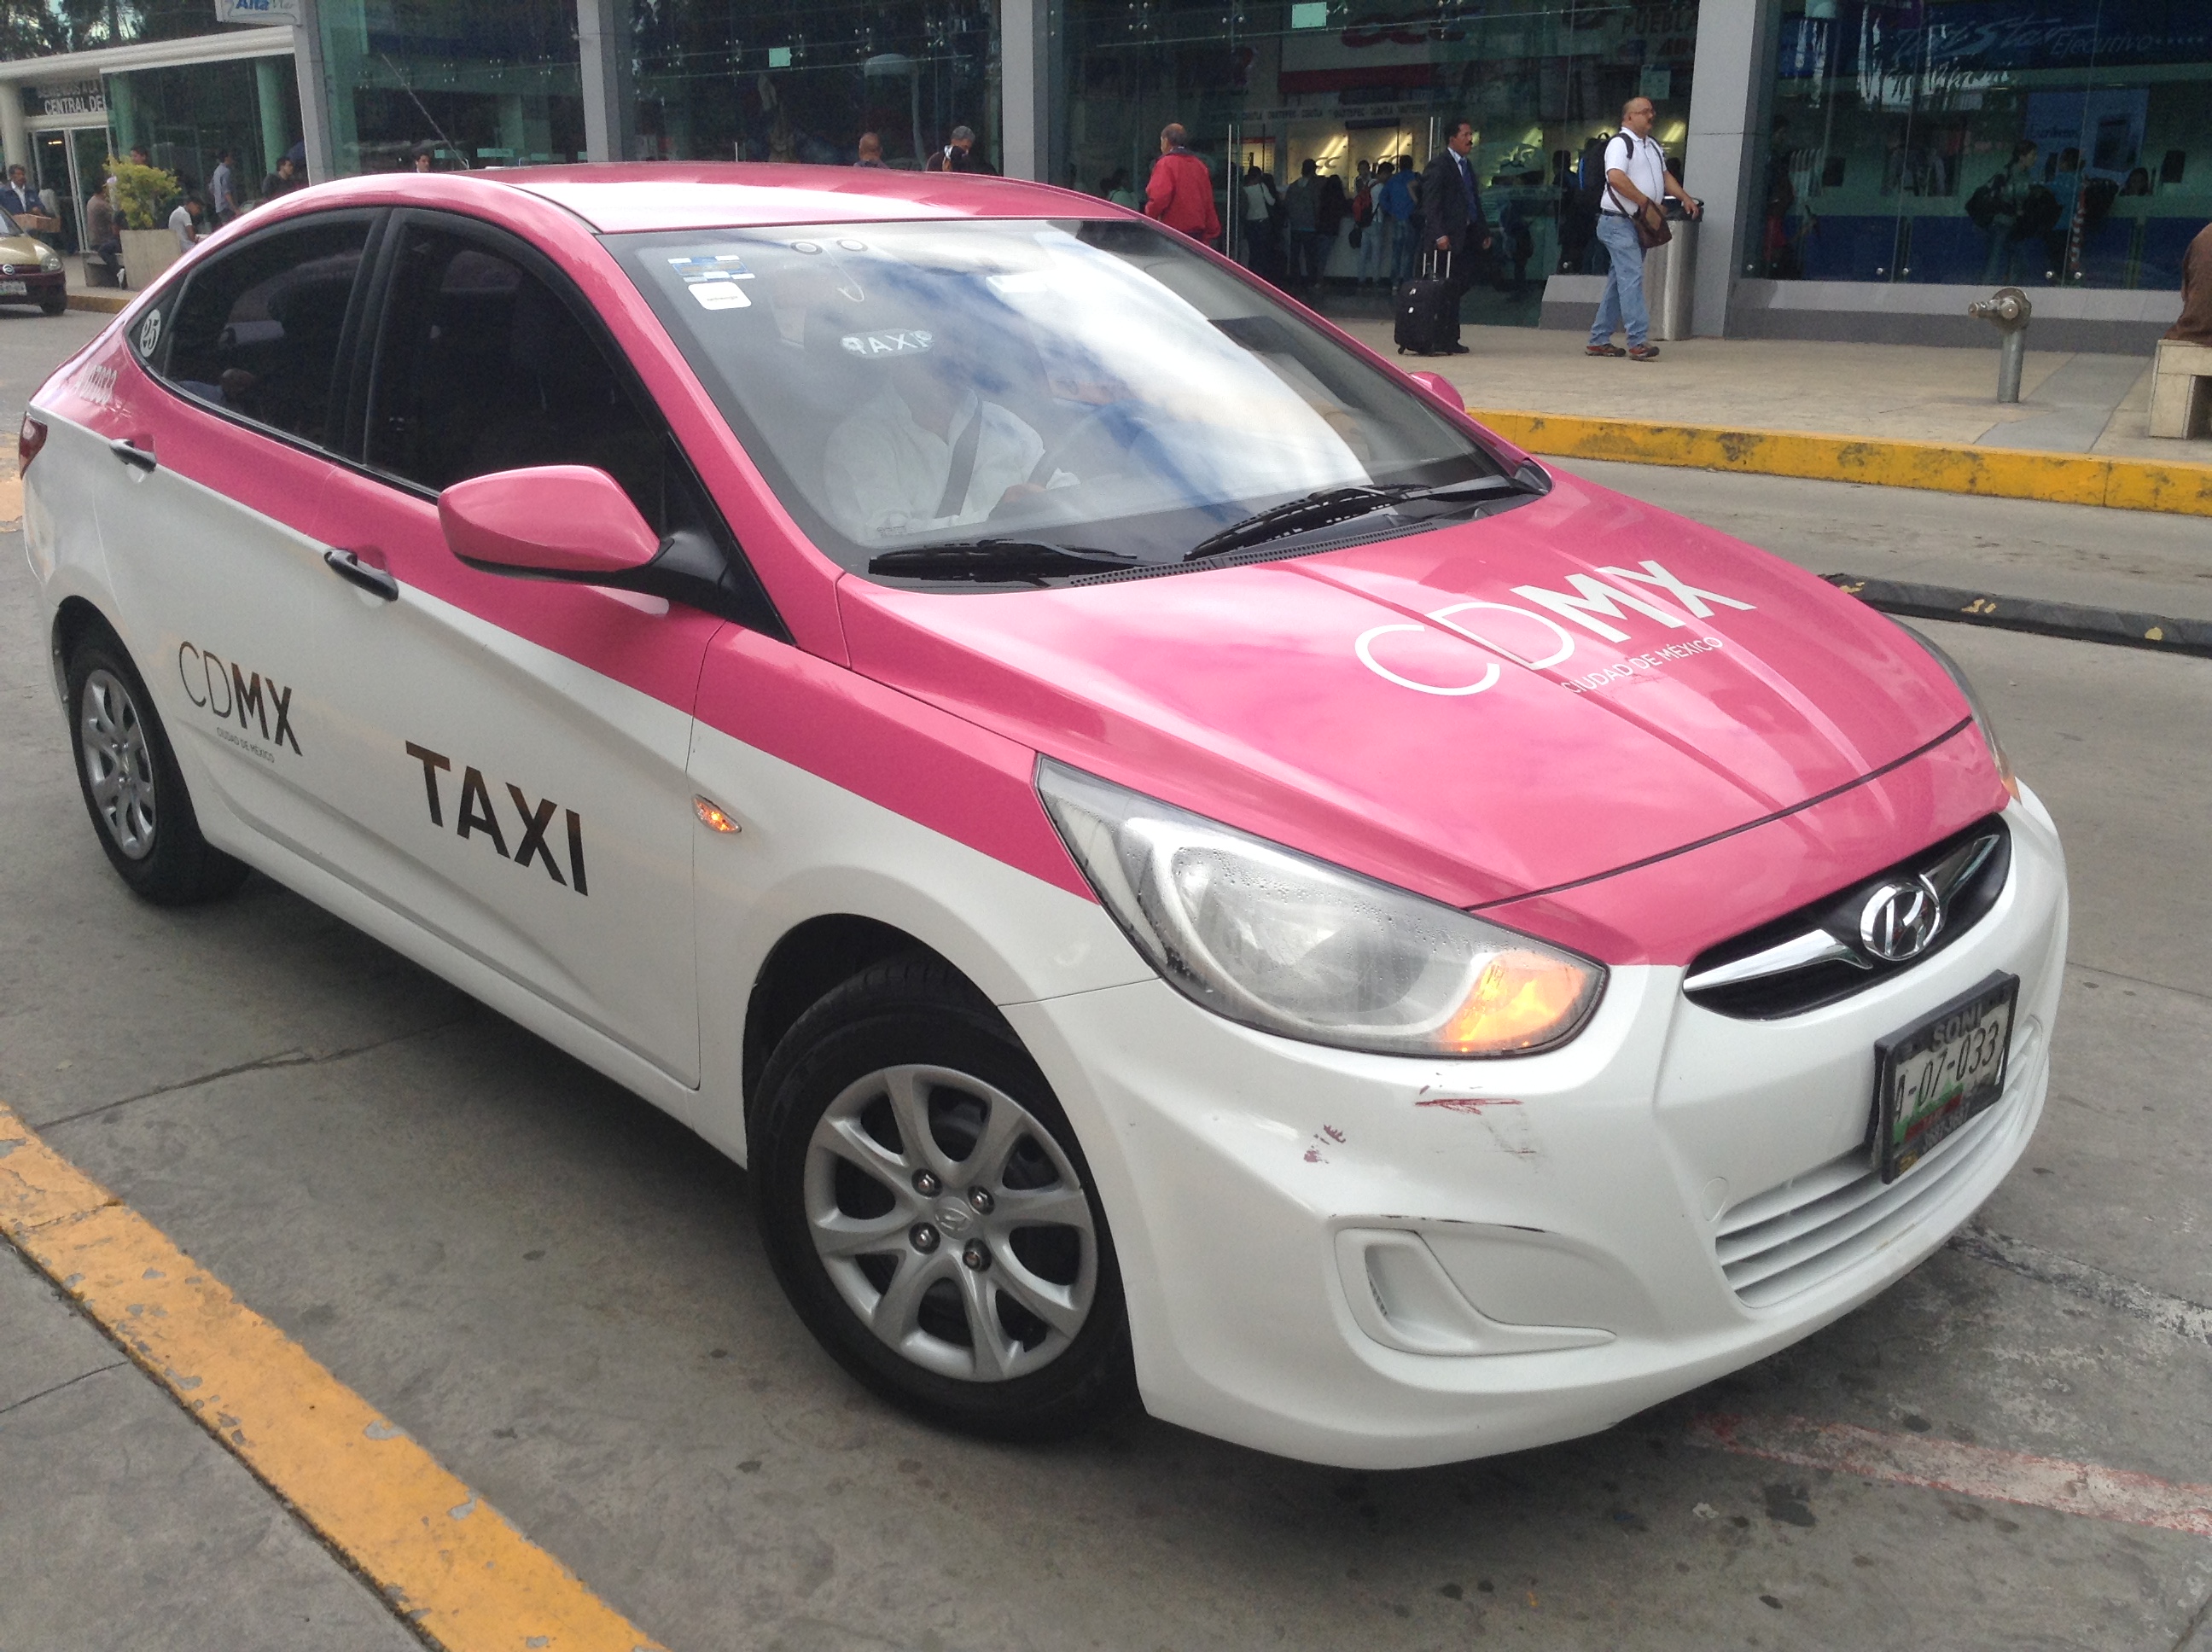 Taxis in Mexico